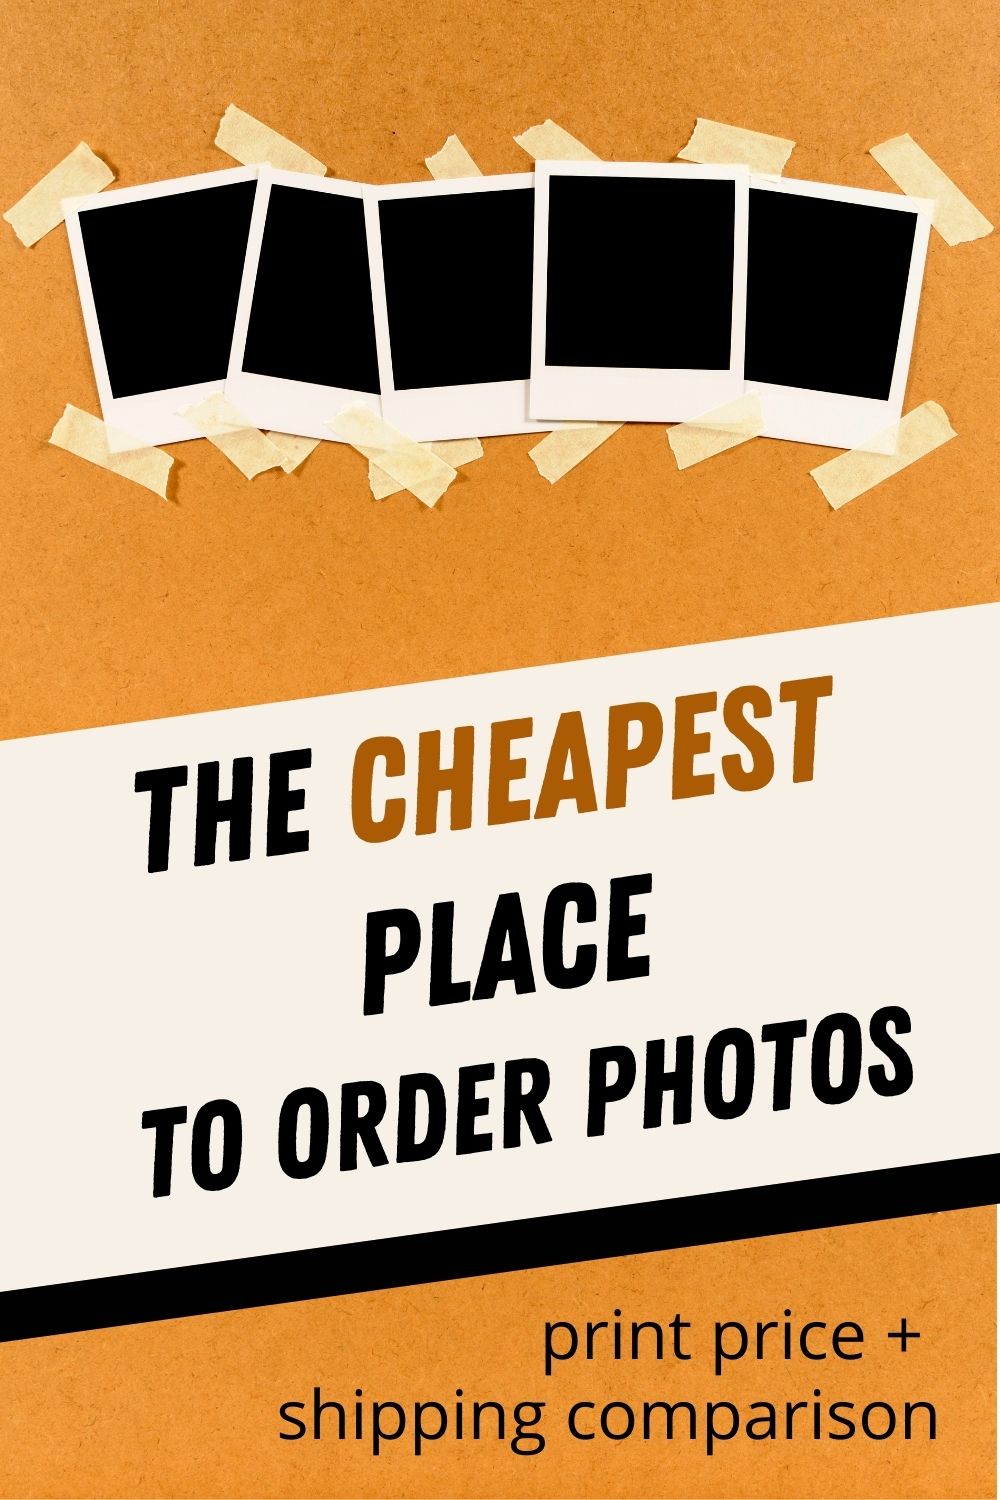 cheapest-place-to-print-photos-cost-shipping-comparison-snap